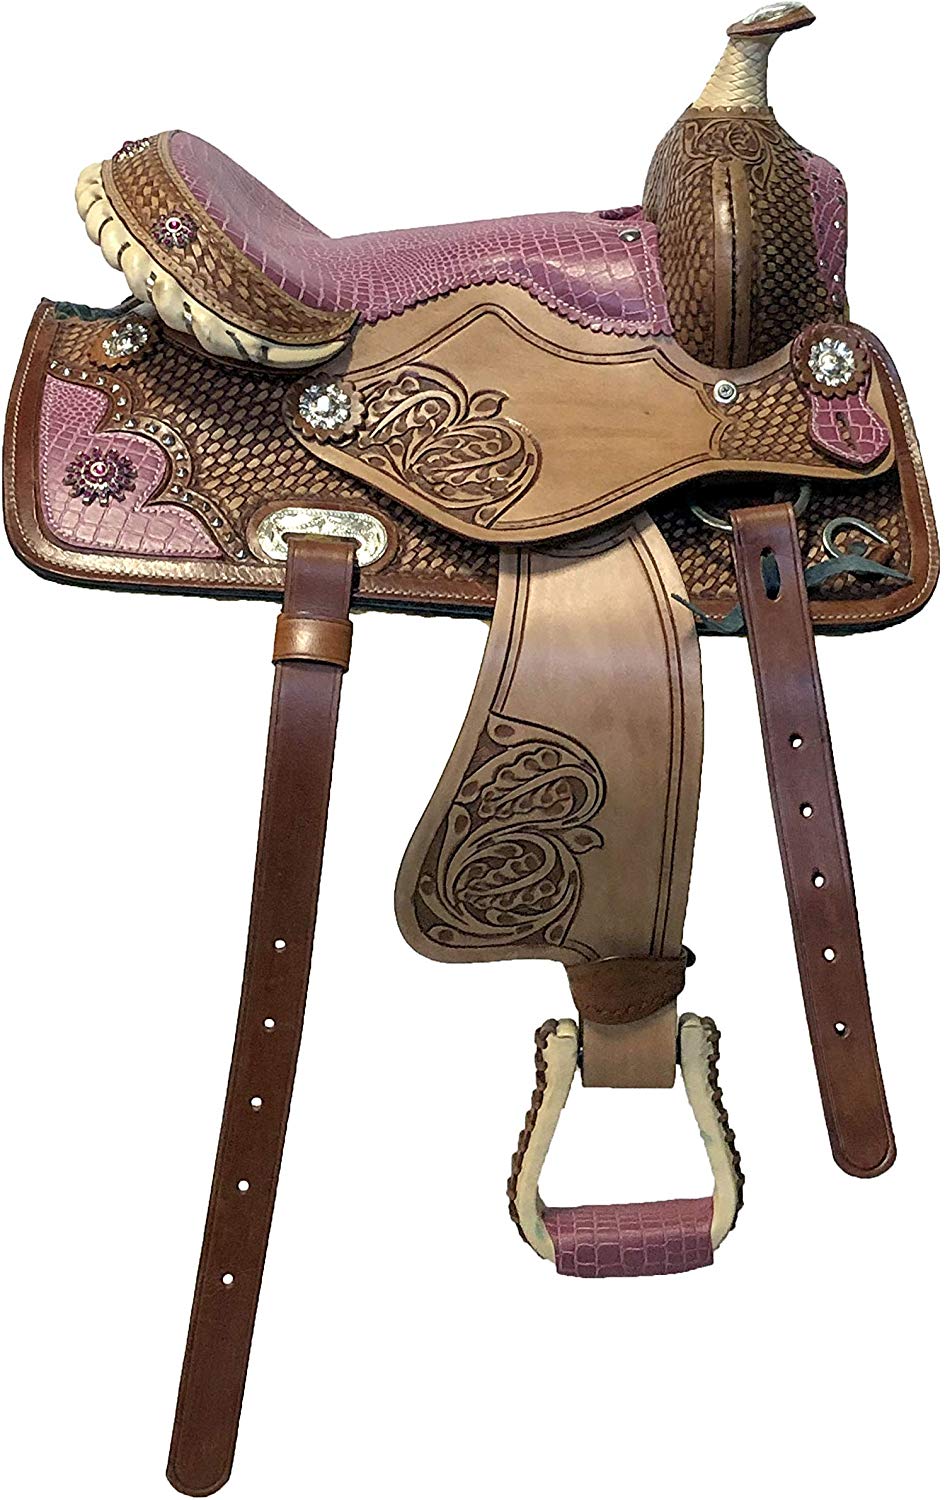 10" Youth Mini Pony Western Leather Saddle with Pink or Black Suede Seat 